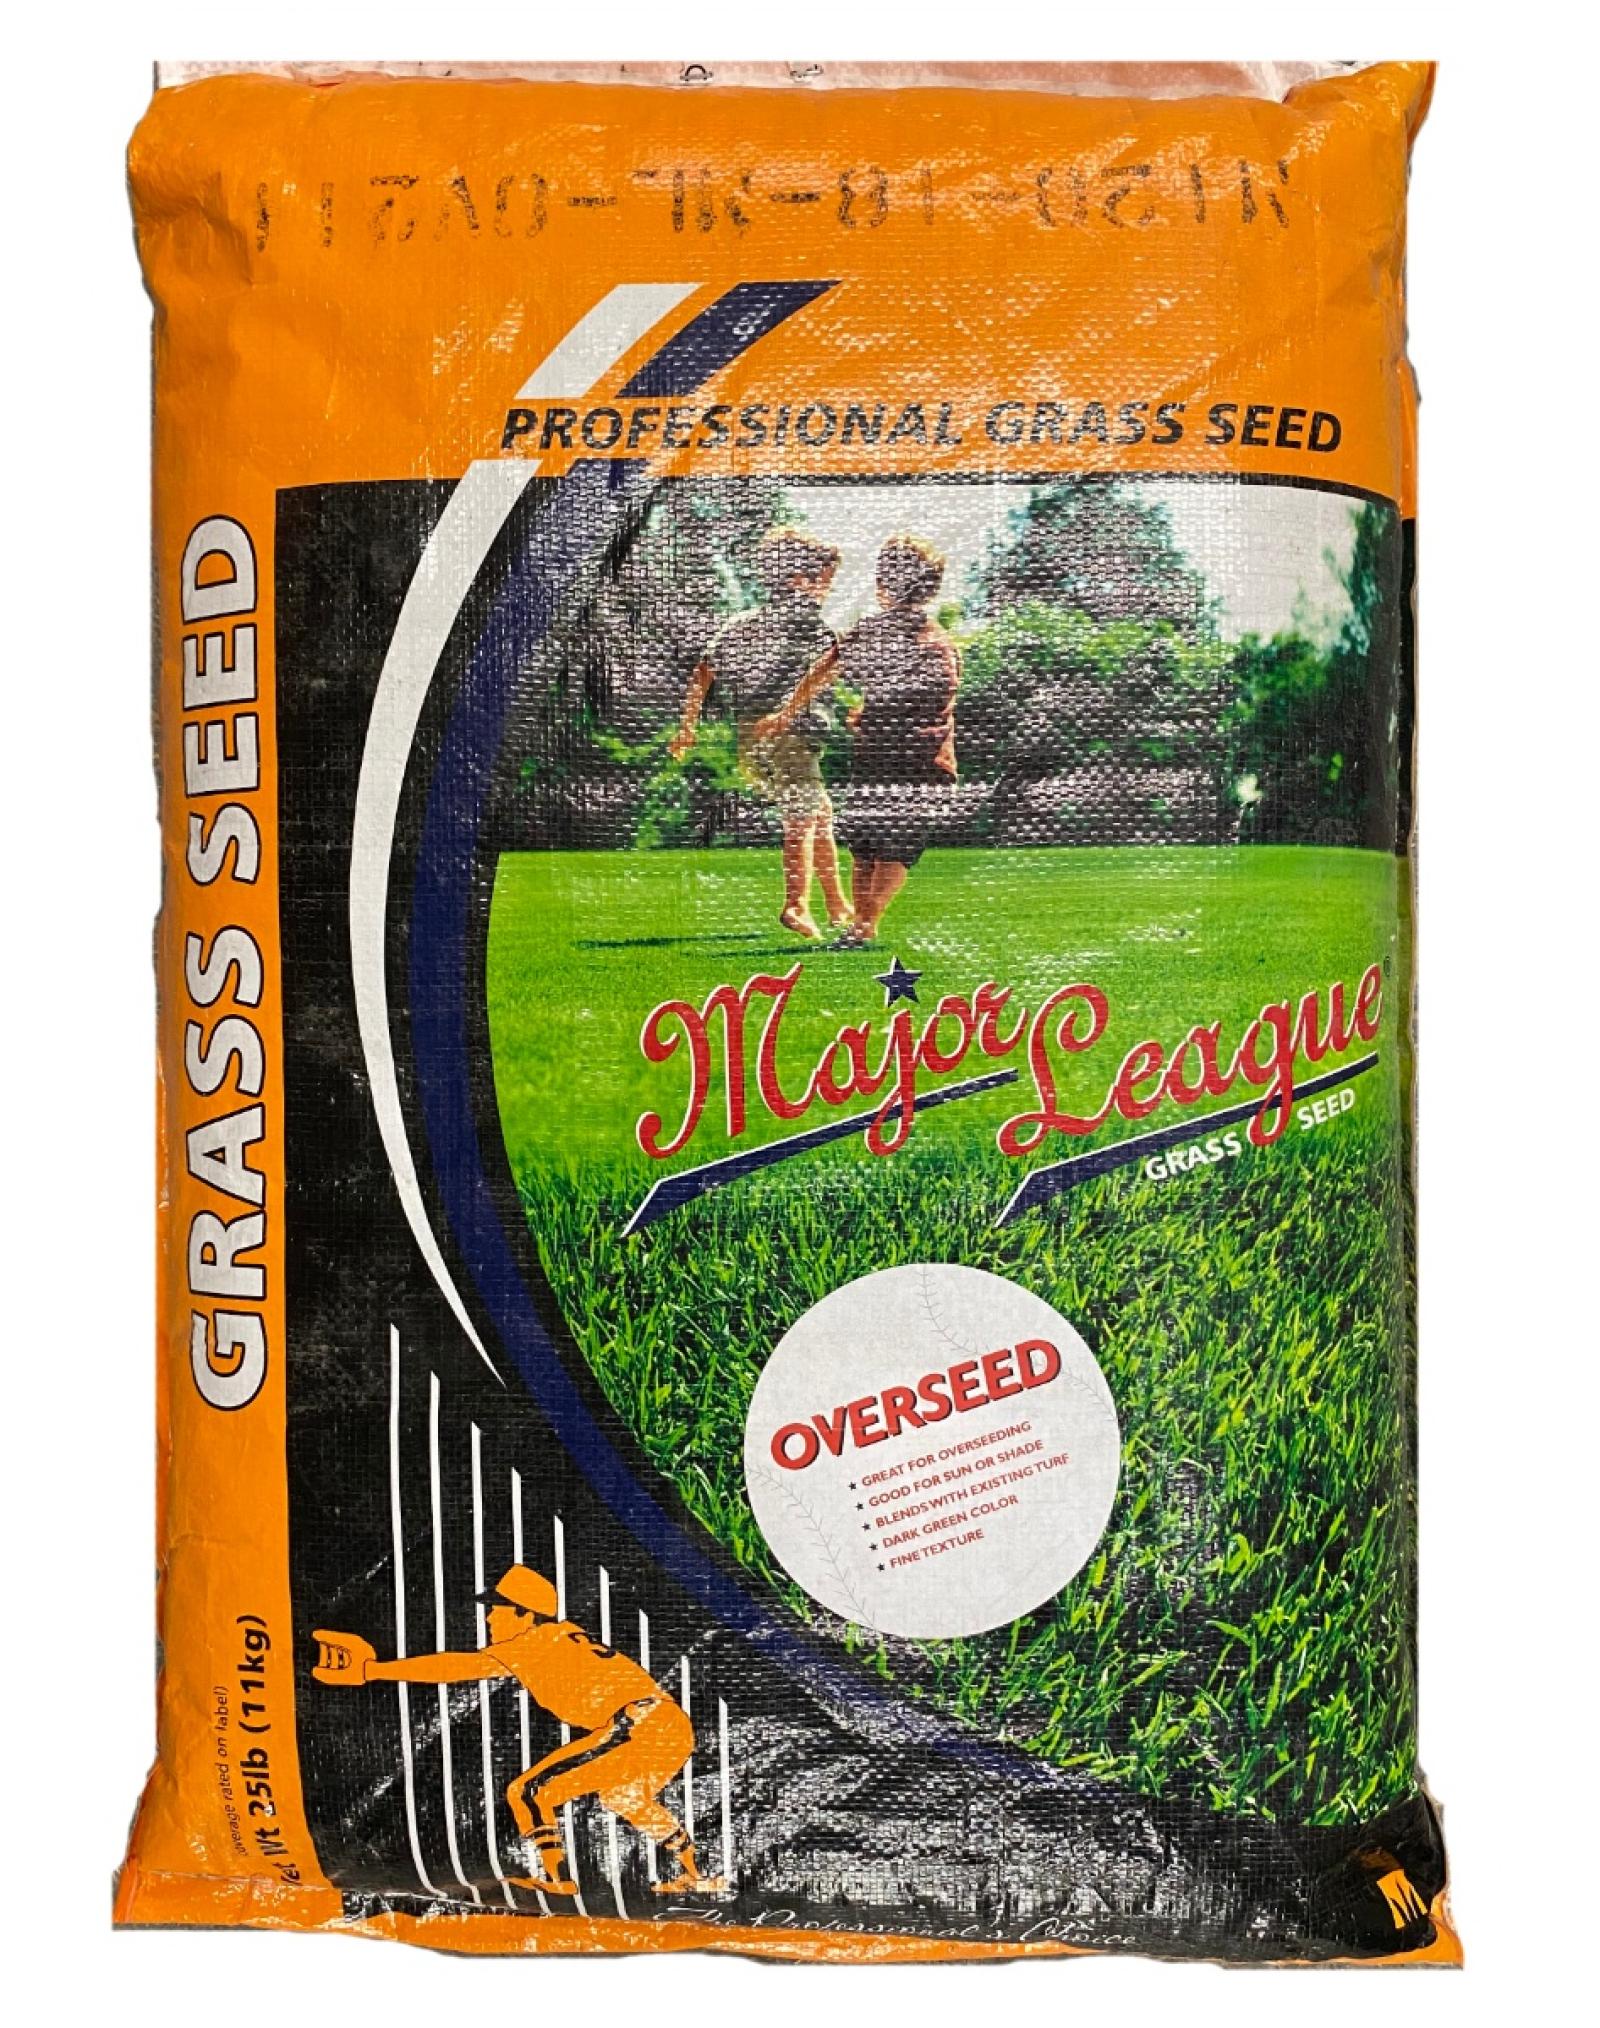 Major League Overseed Mix Grass Seed